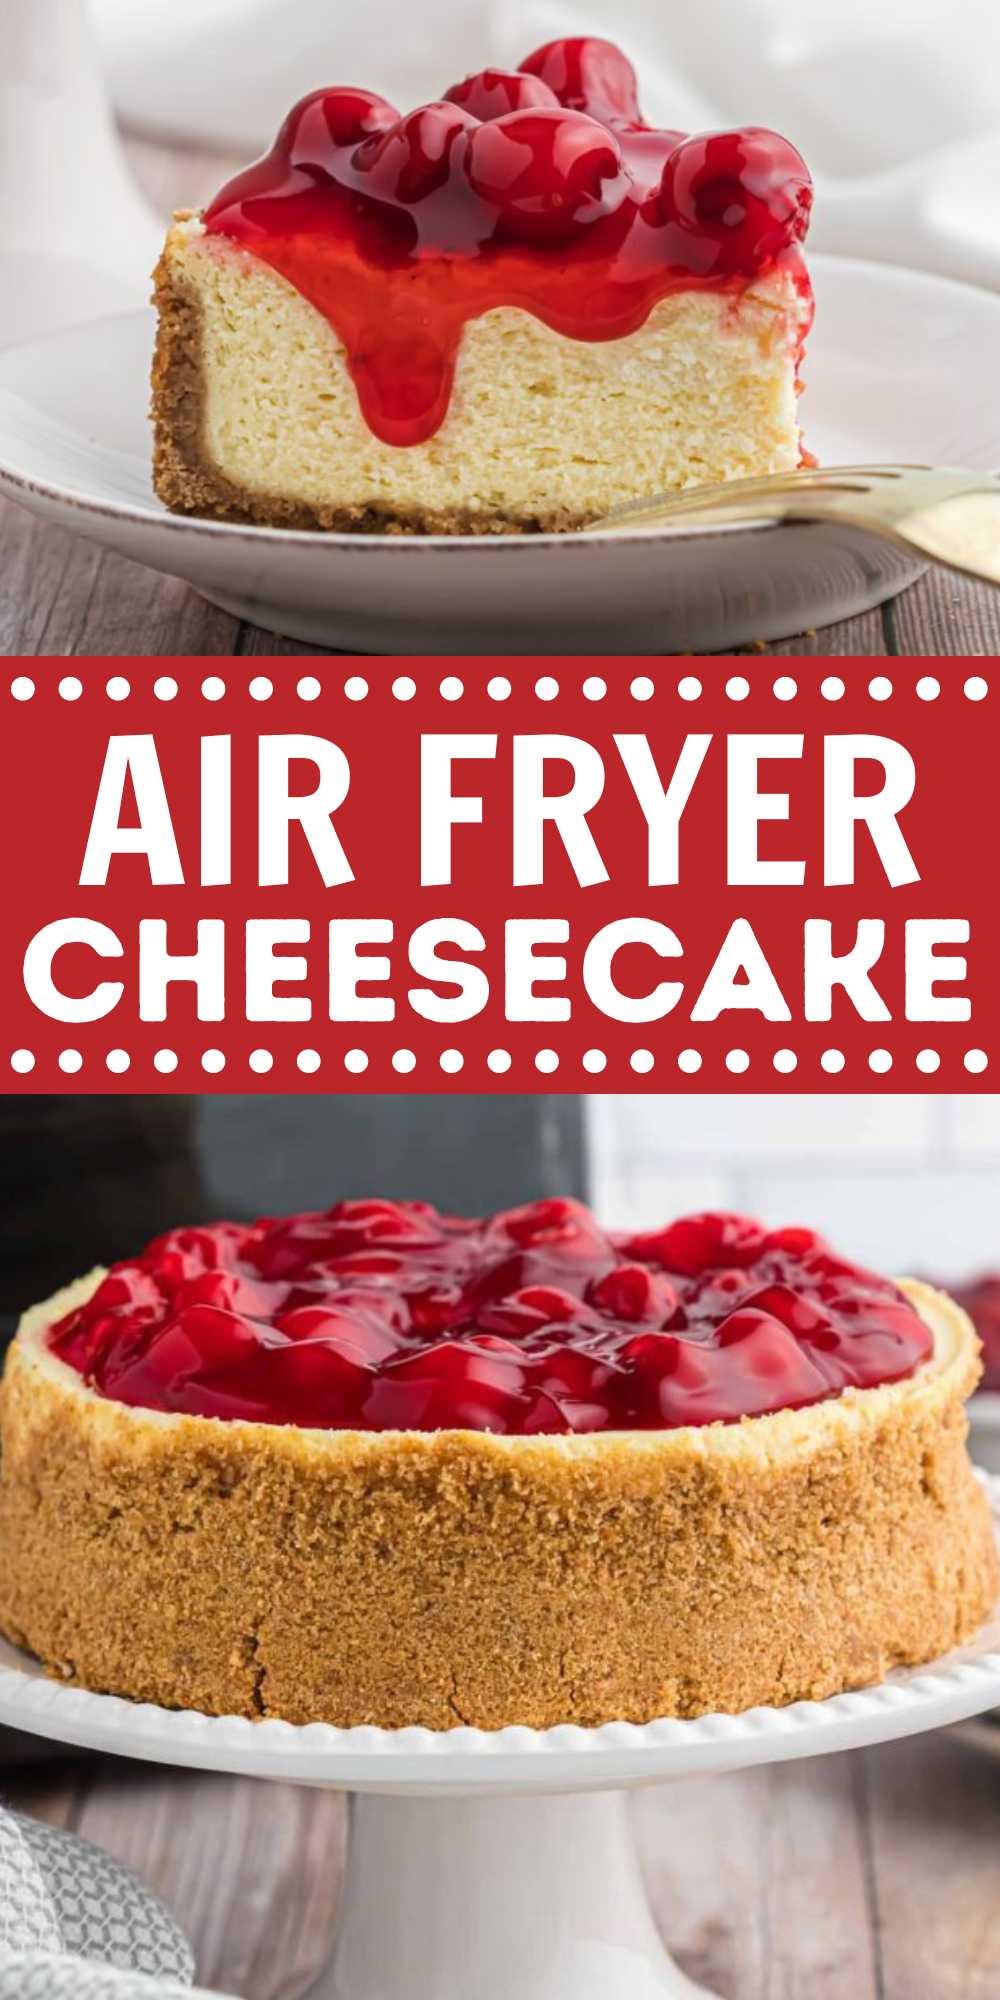 Air Fryer Cheesecake is a delicious way to make your favorite dessert. This recipe is simple and the results are a creamy cheesecake. The cheesecake filling is layered in a graham cracker crust and cooked easily in the air fryer. #eatingonadime #airfryercheesecake #cheesecake #airfryerrecipes